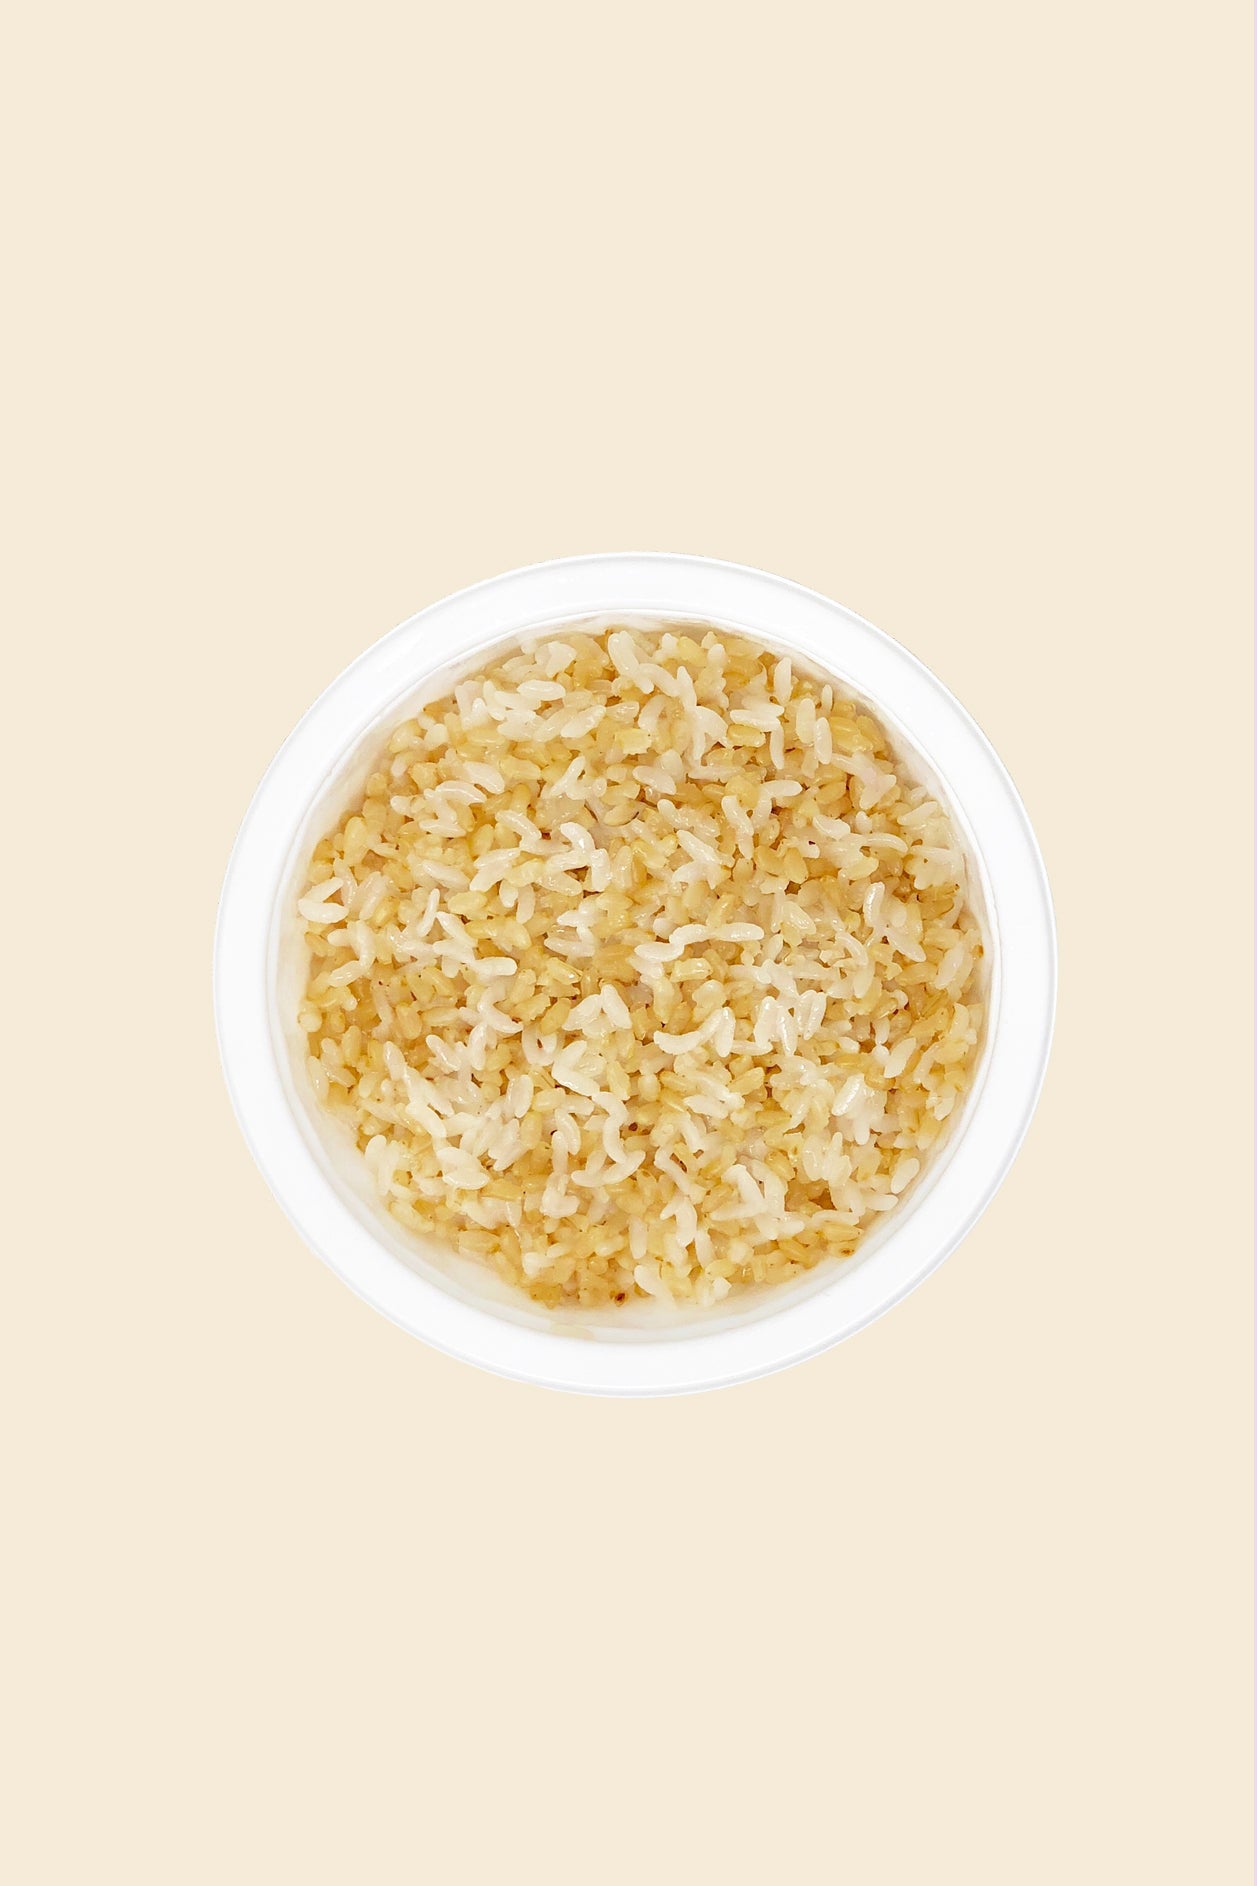 Deliciously Cooked Rice [12PK/BOX]